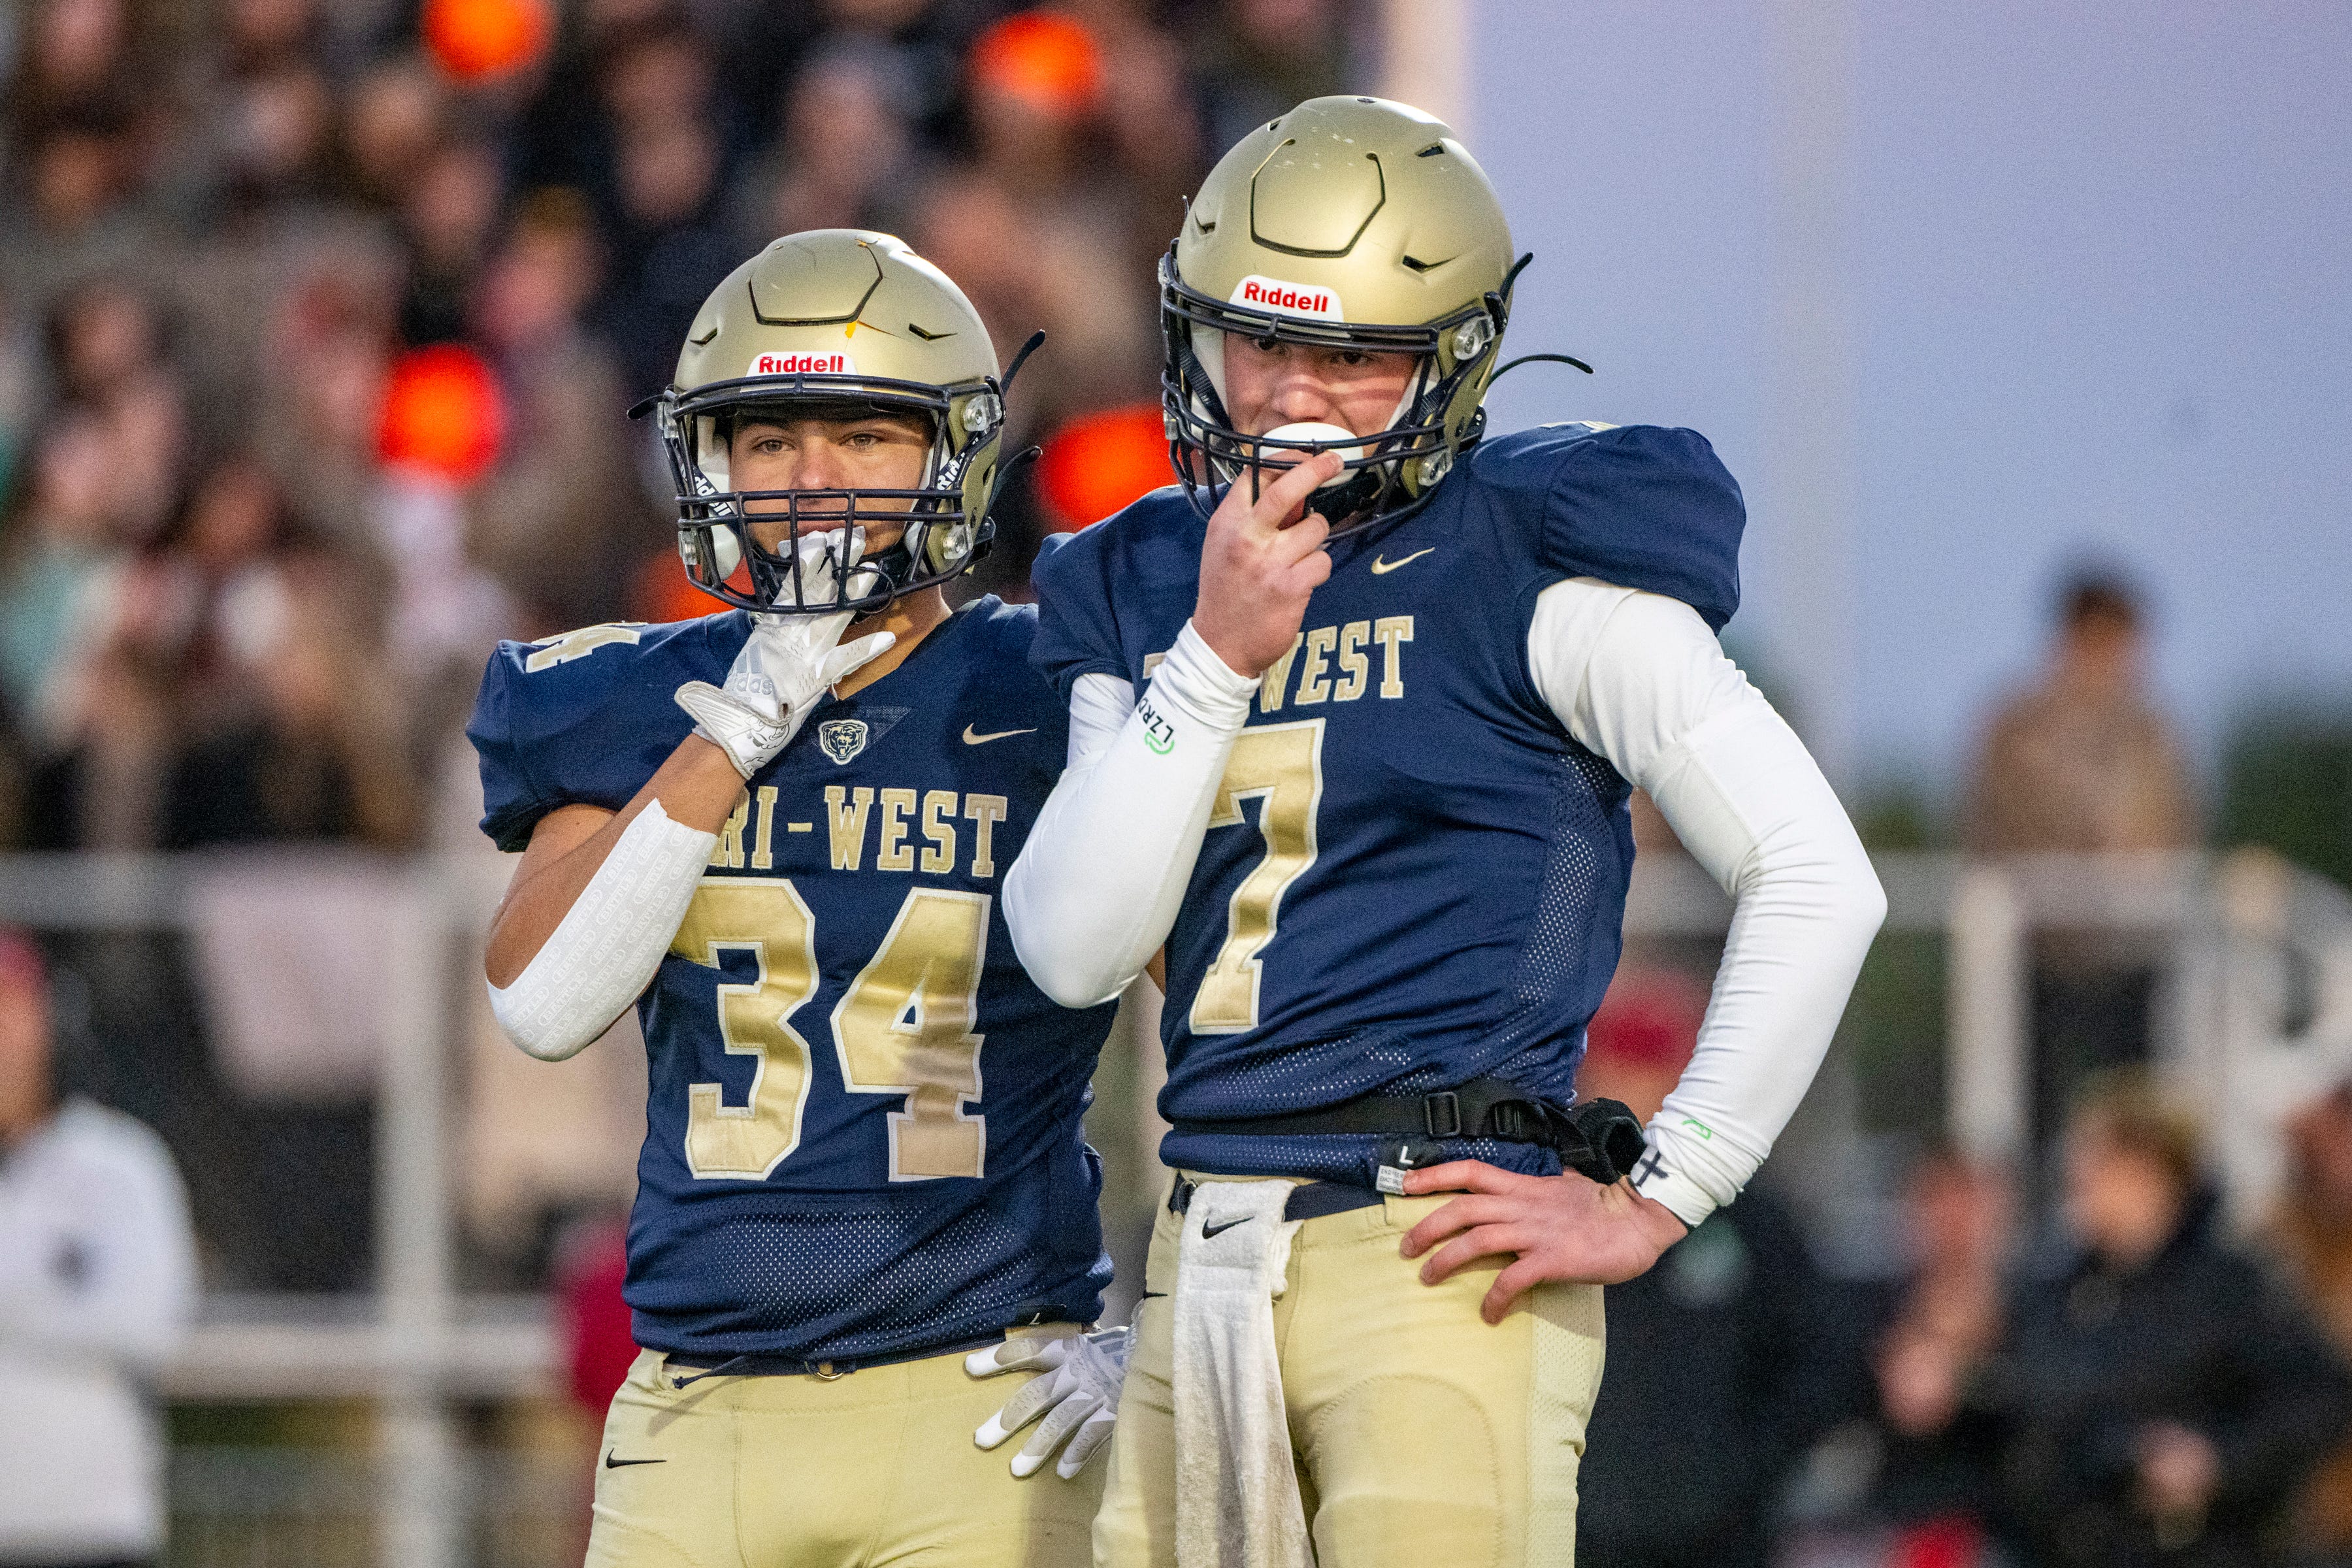 IHSAA football What we learned from sectional finals Weird strategy